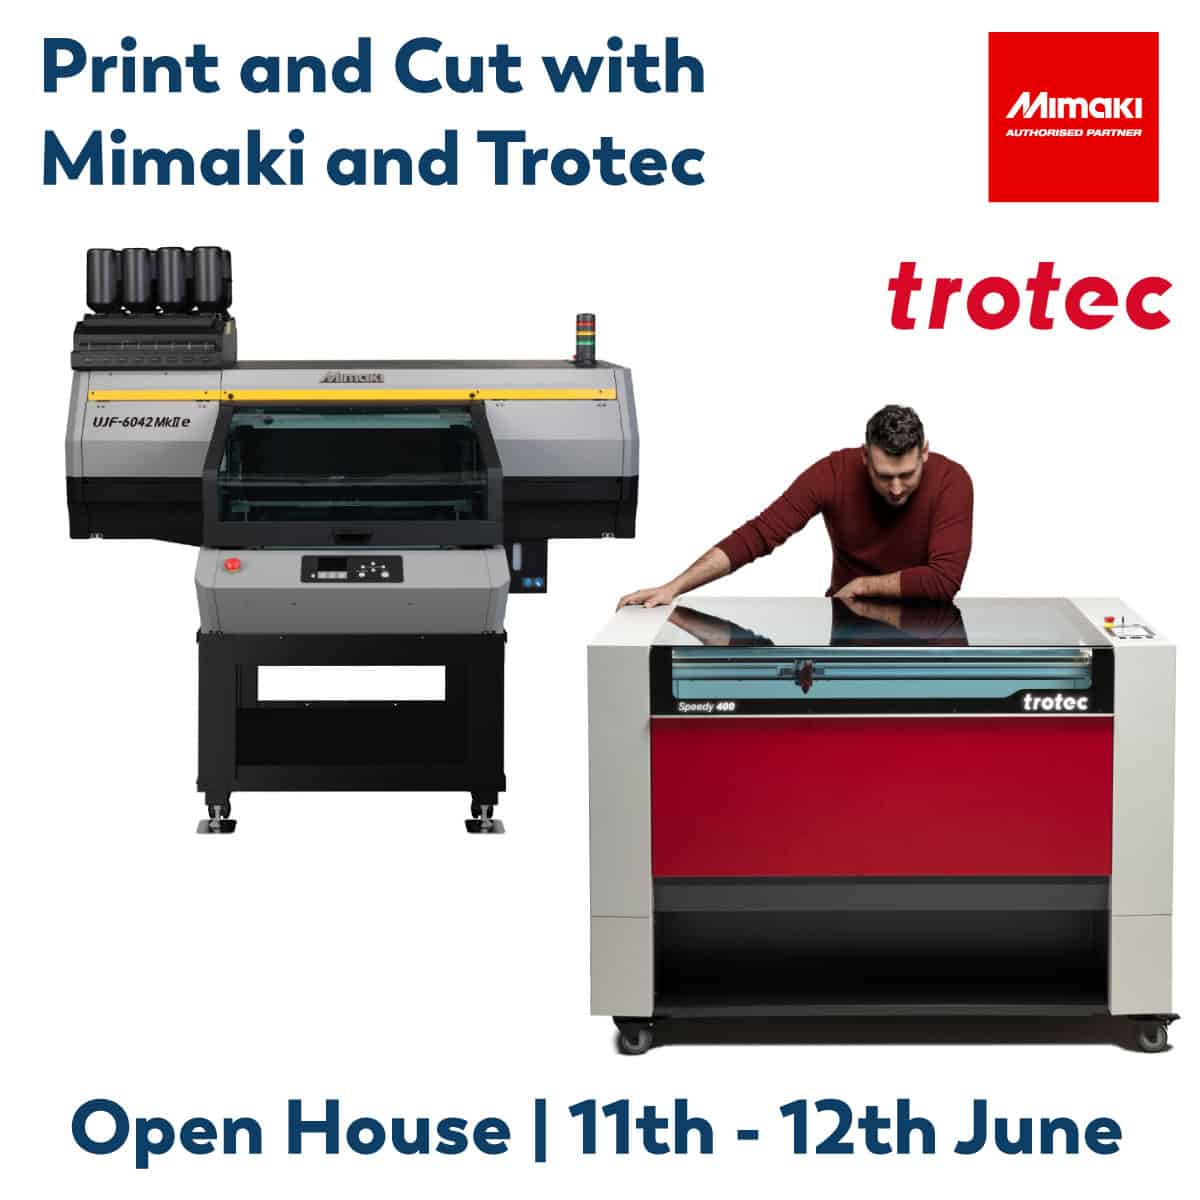 Print and Cut with Mimaki and Trotec